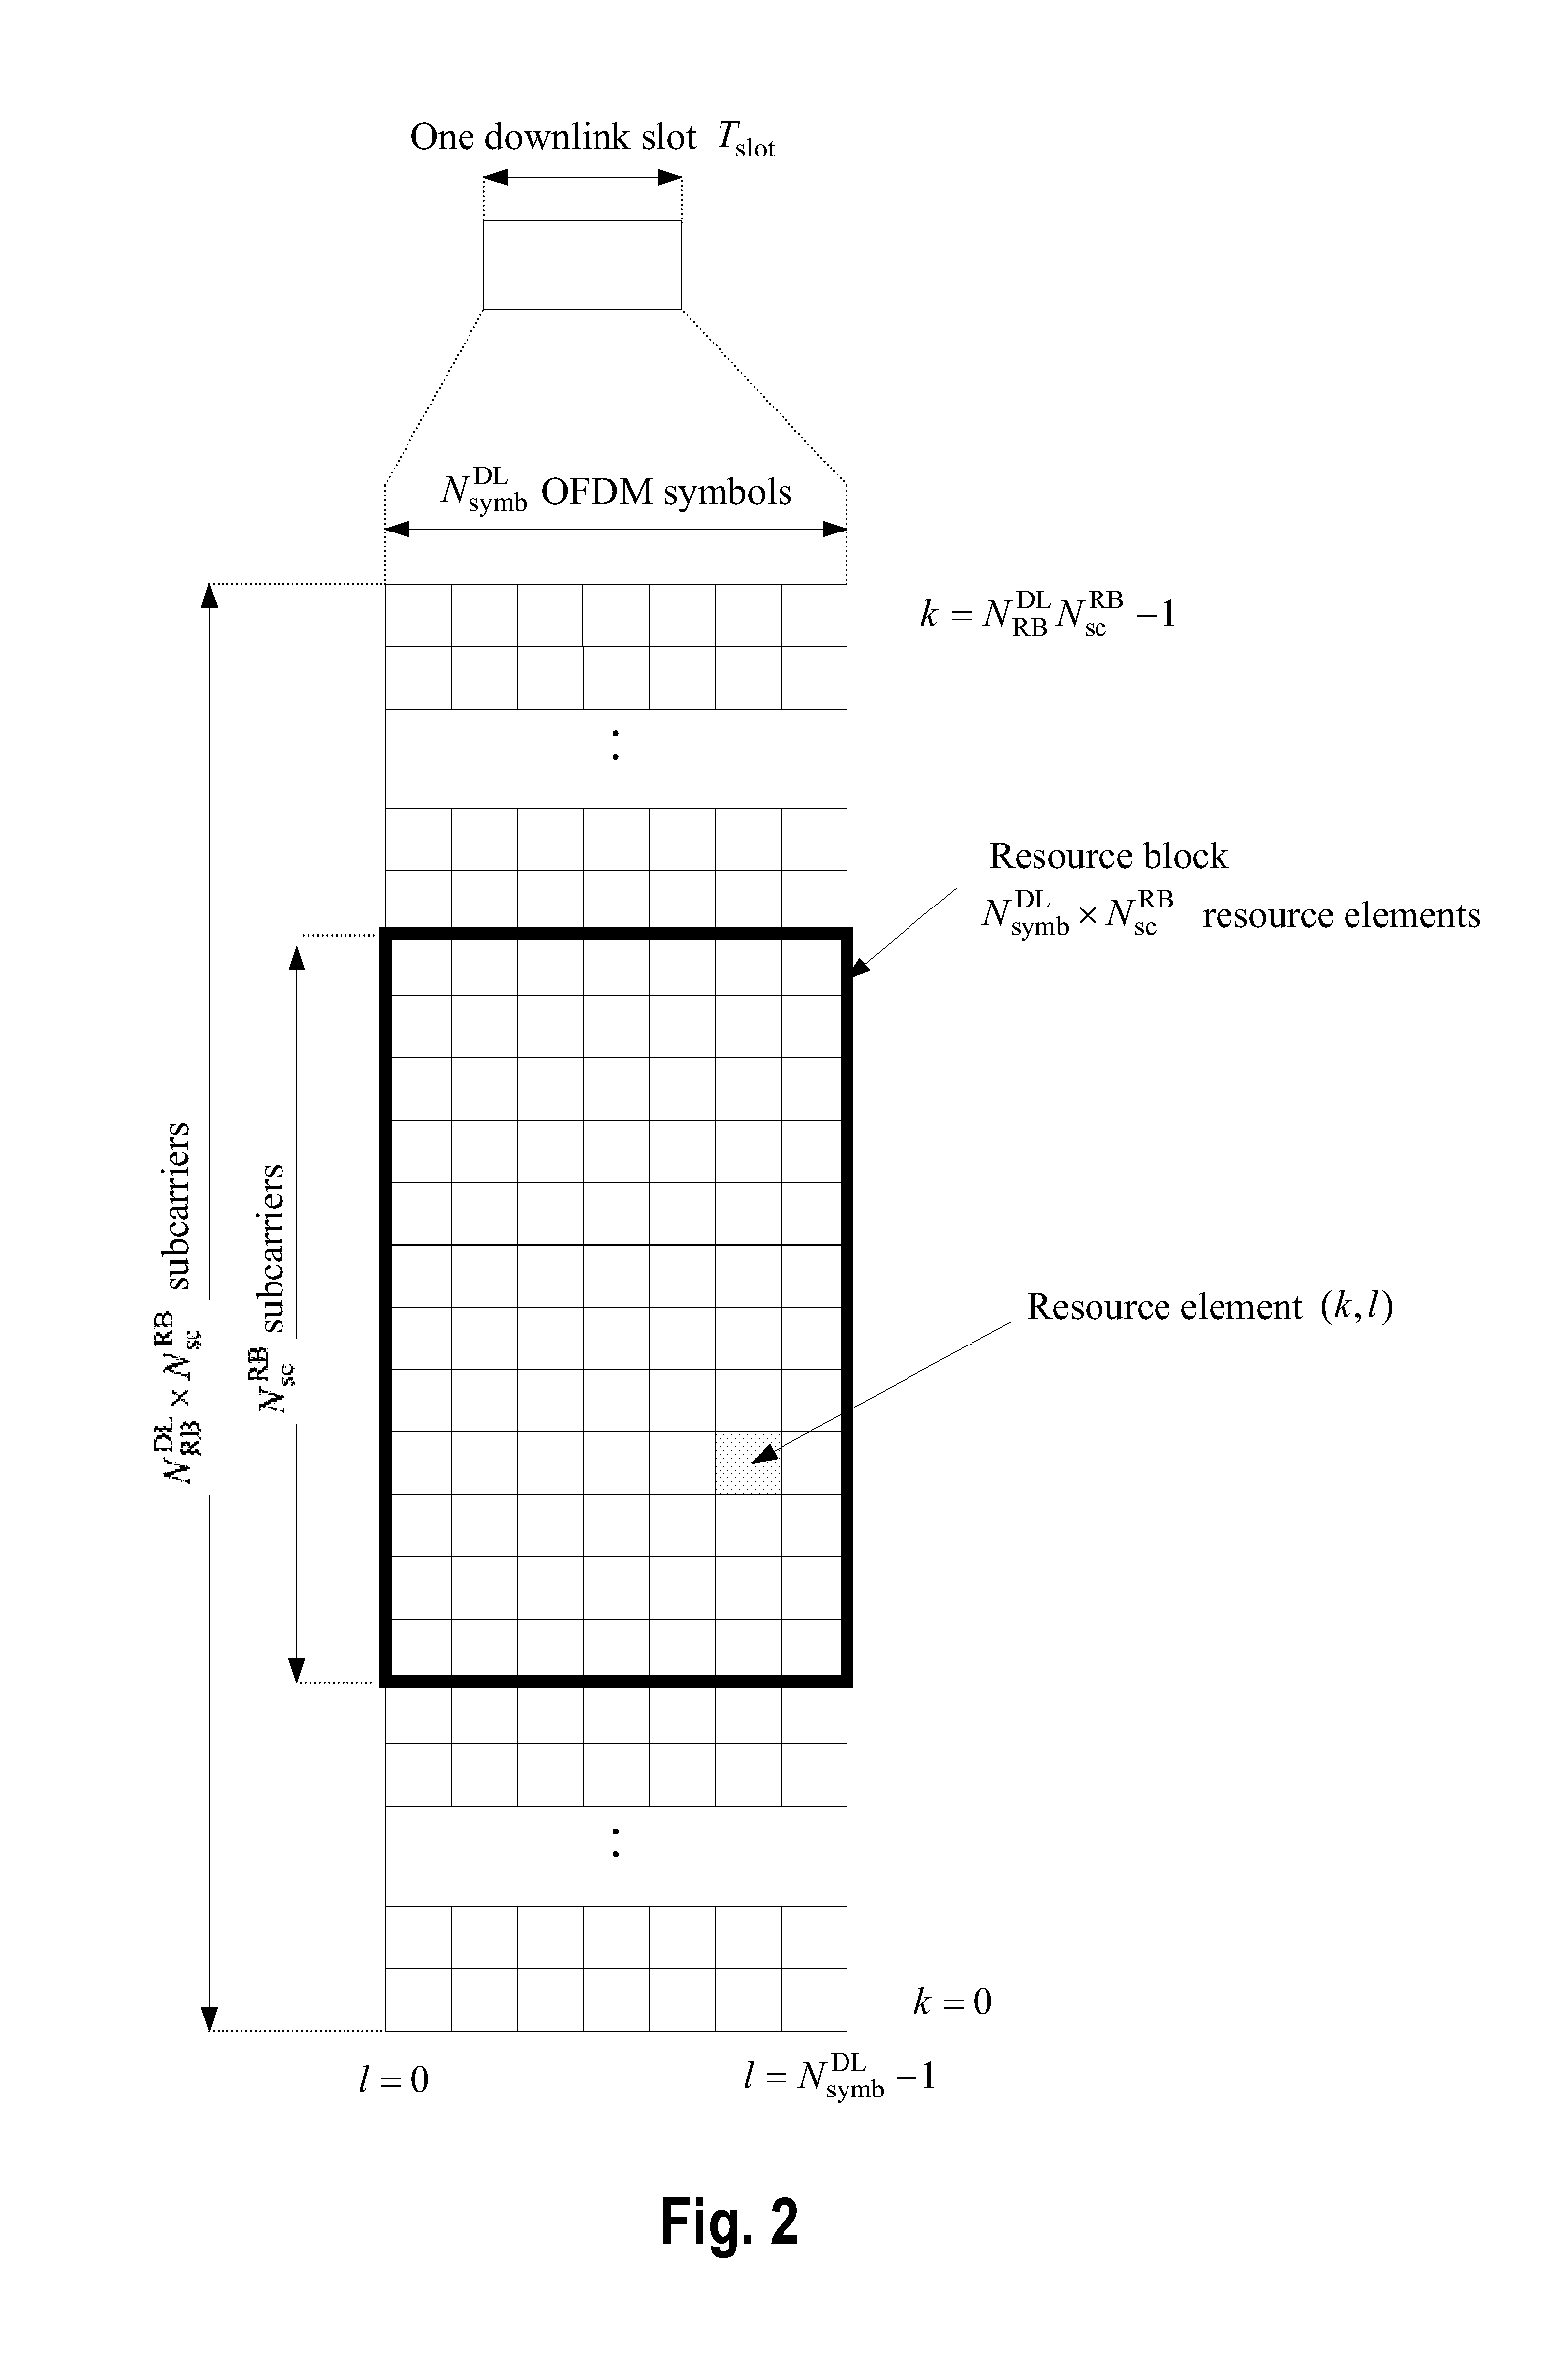 Configuration of uplink and downlink grant search spaces in an ofdm-based mobile communication system